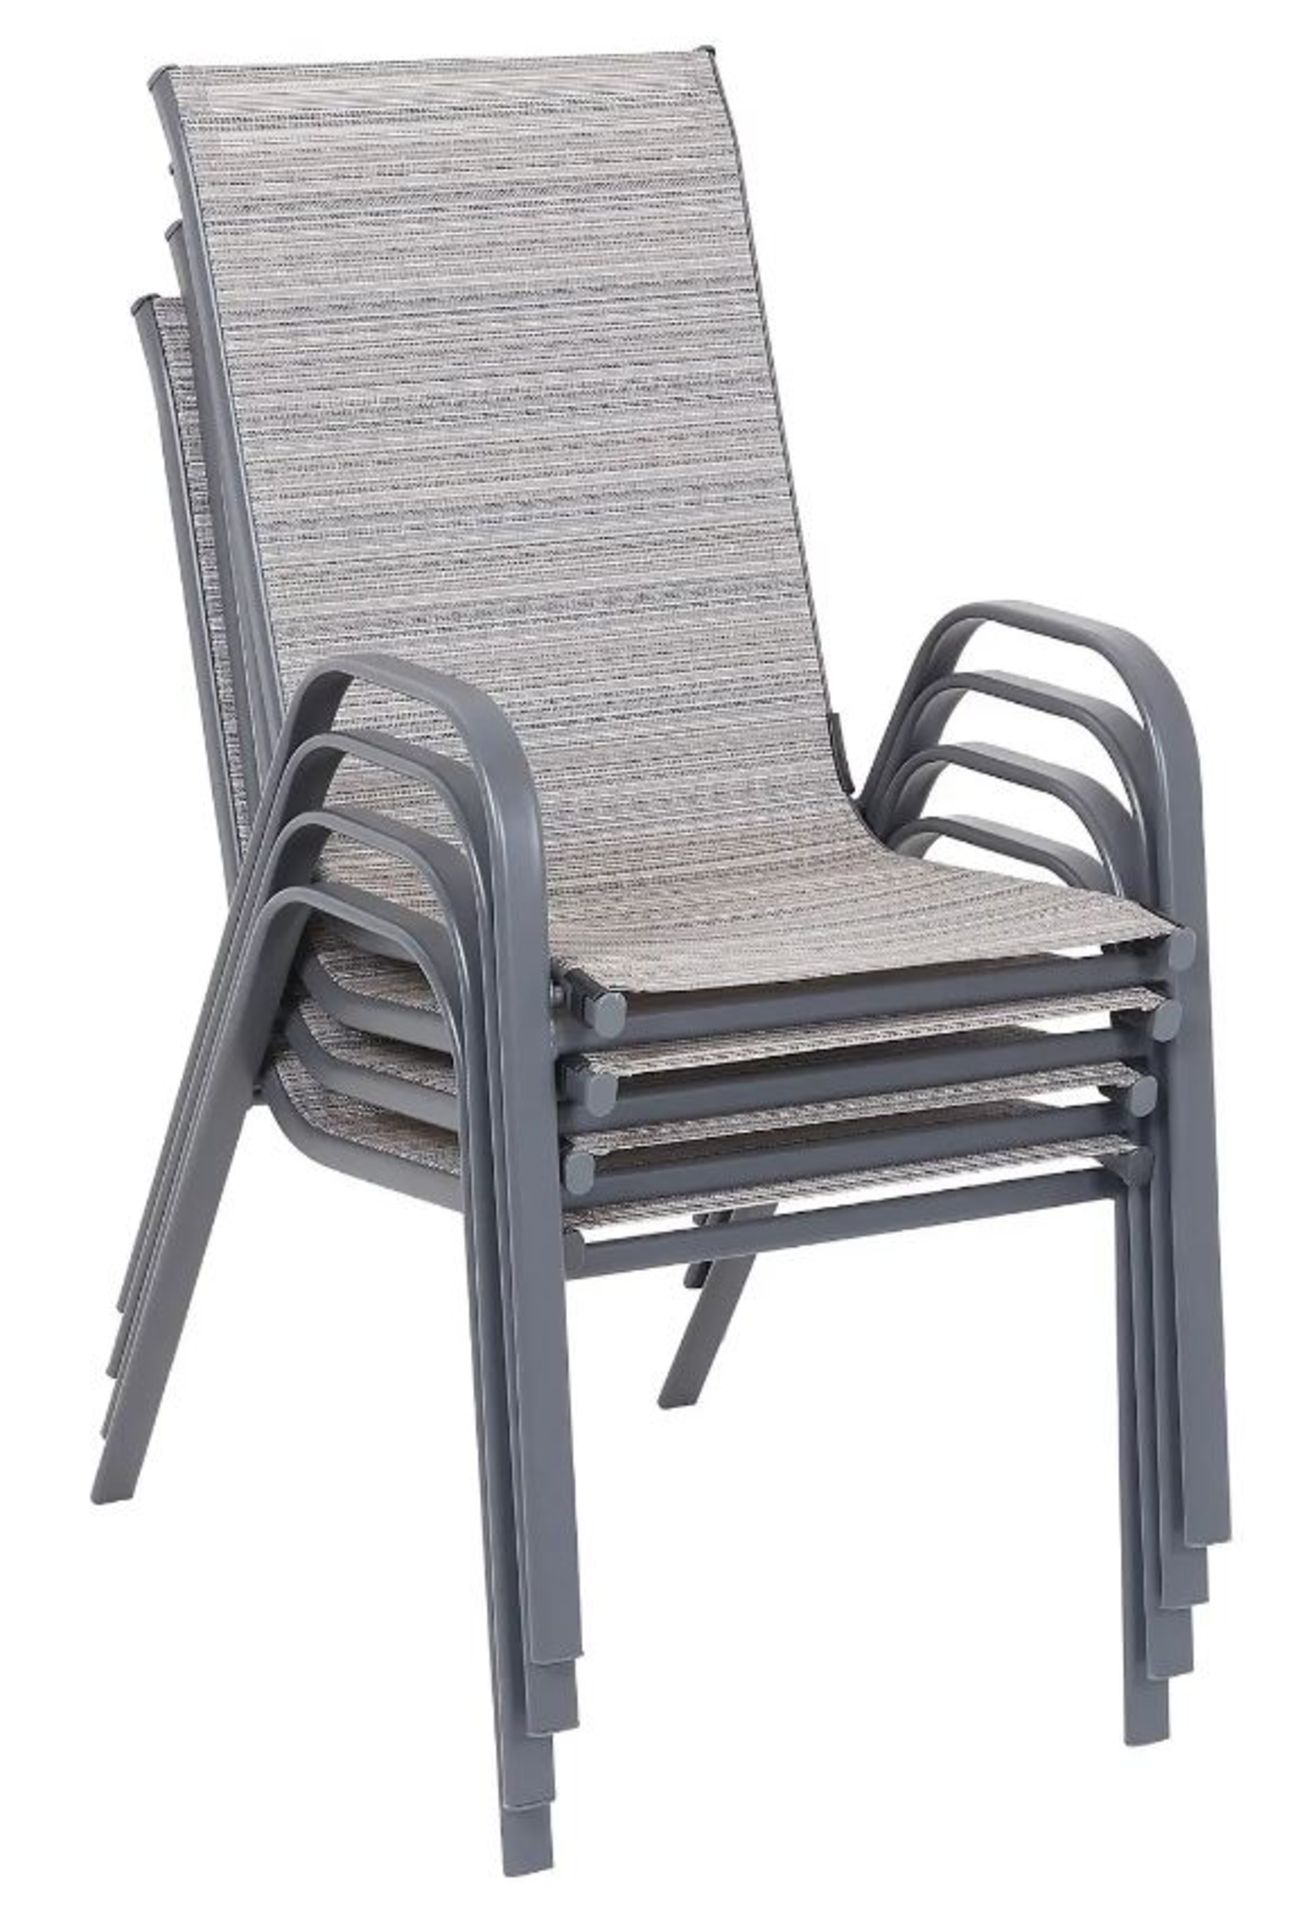 (R10F) 2x Andorra Stacking Chair. Powder Coated Steel Frame. (H92x W55x D73cm). Both Units Appear A - Image 2 of 4